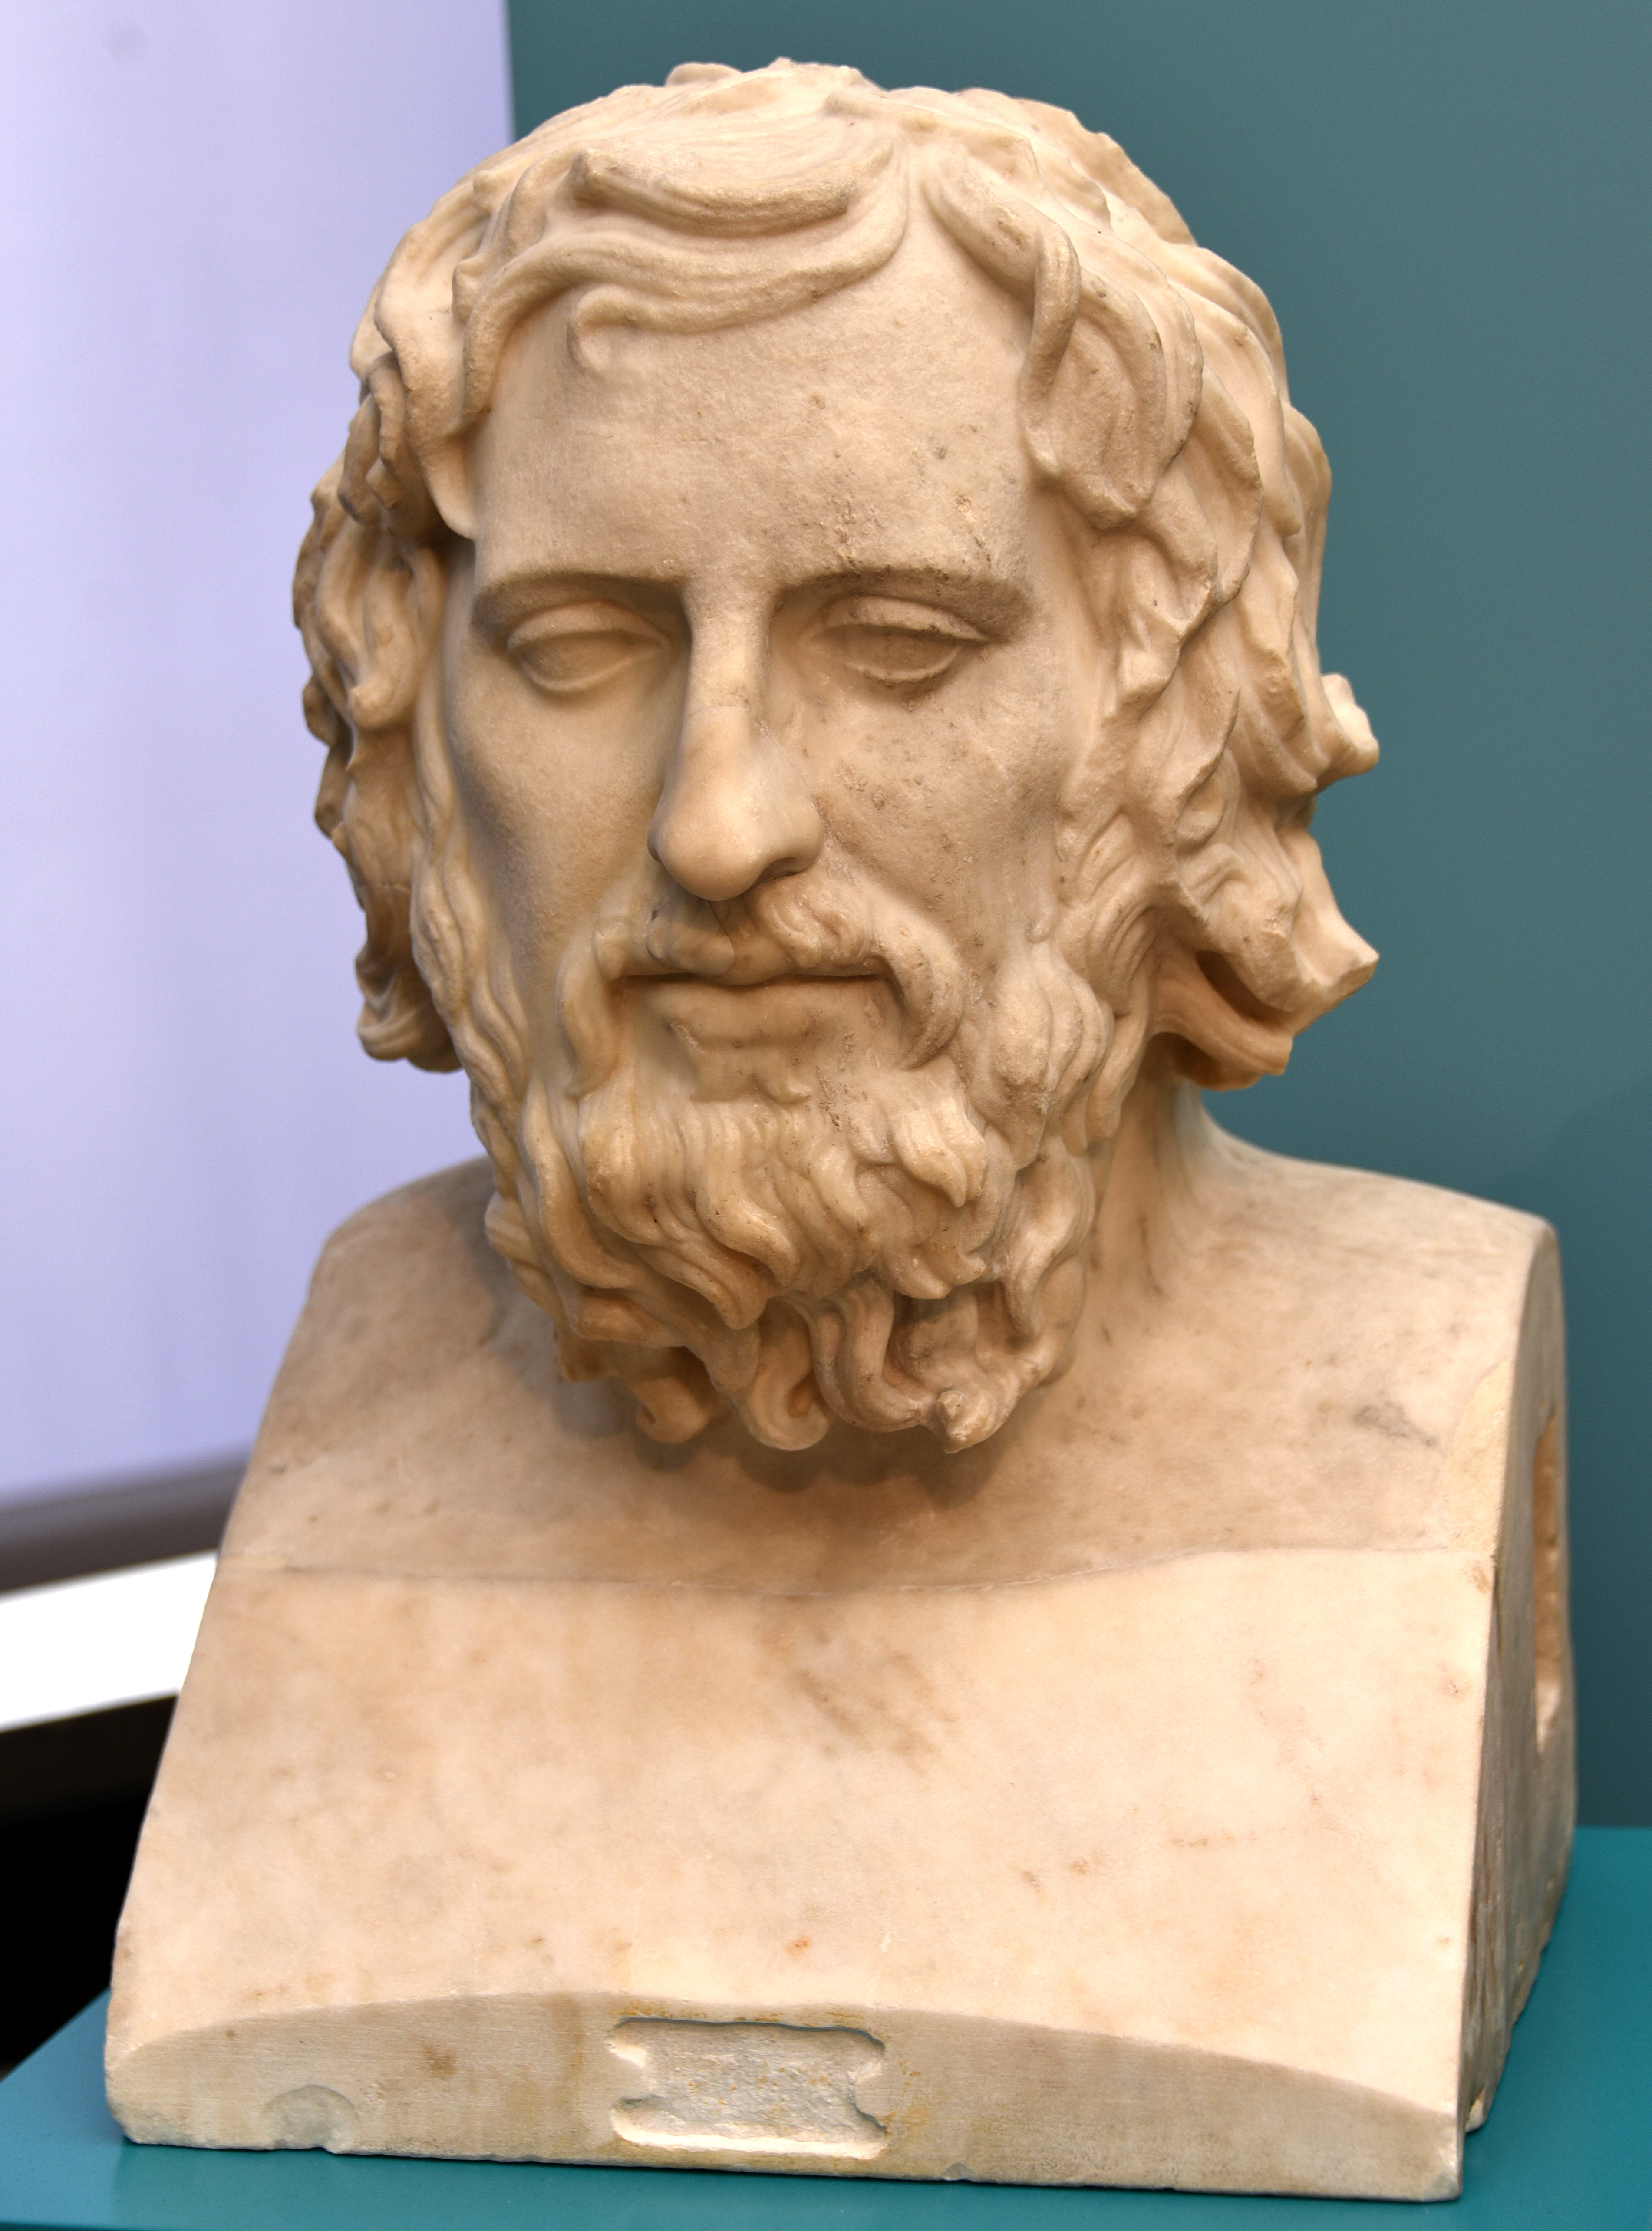 Marble bust of a severe and mean-looking athenian legislator on Craiyon